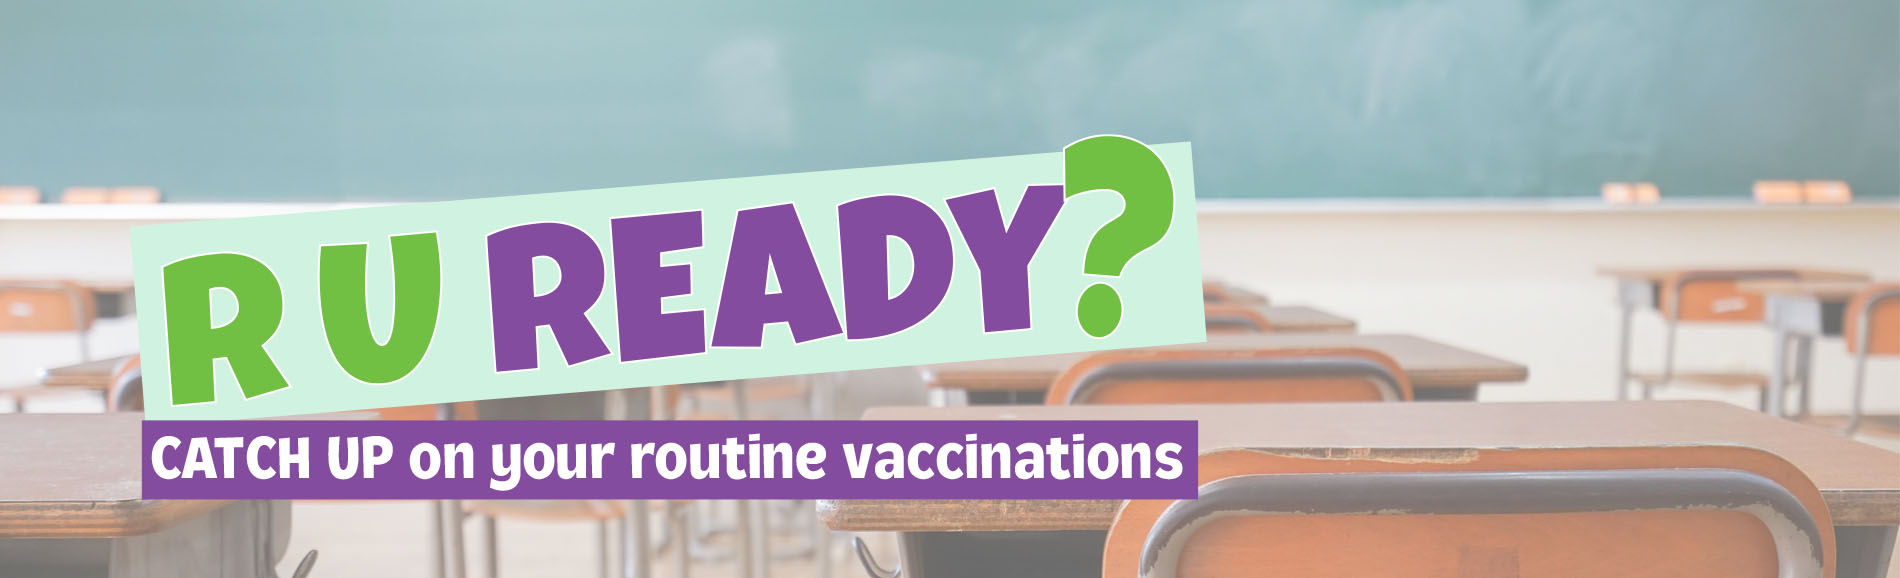 classroom with desks and text says R U Ready? Catch up on your routine vaccinations.